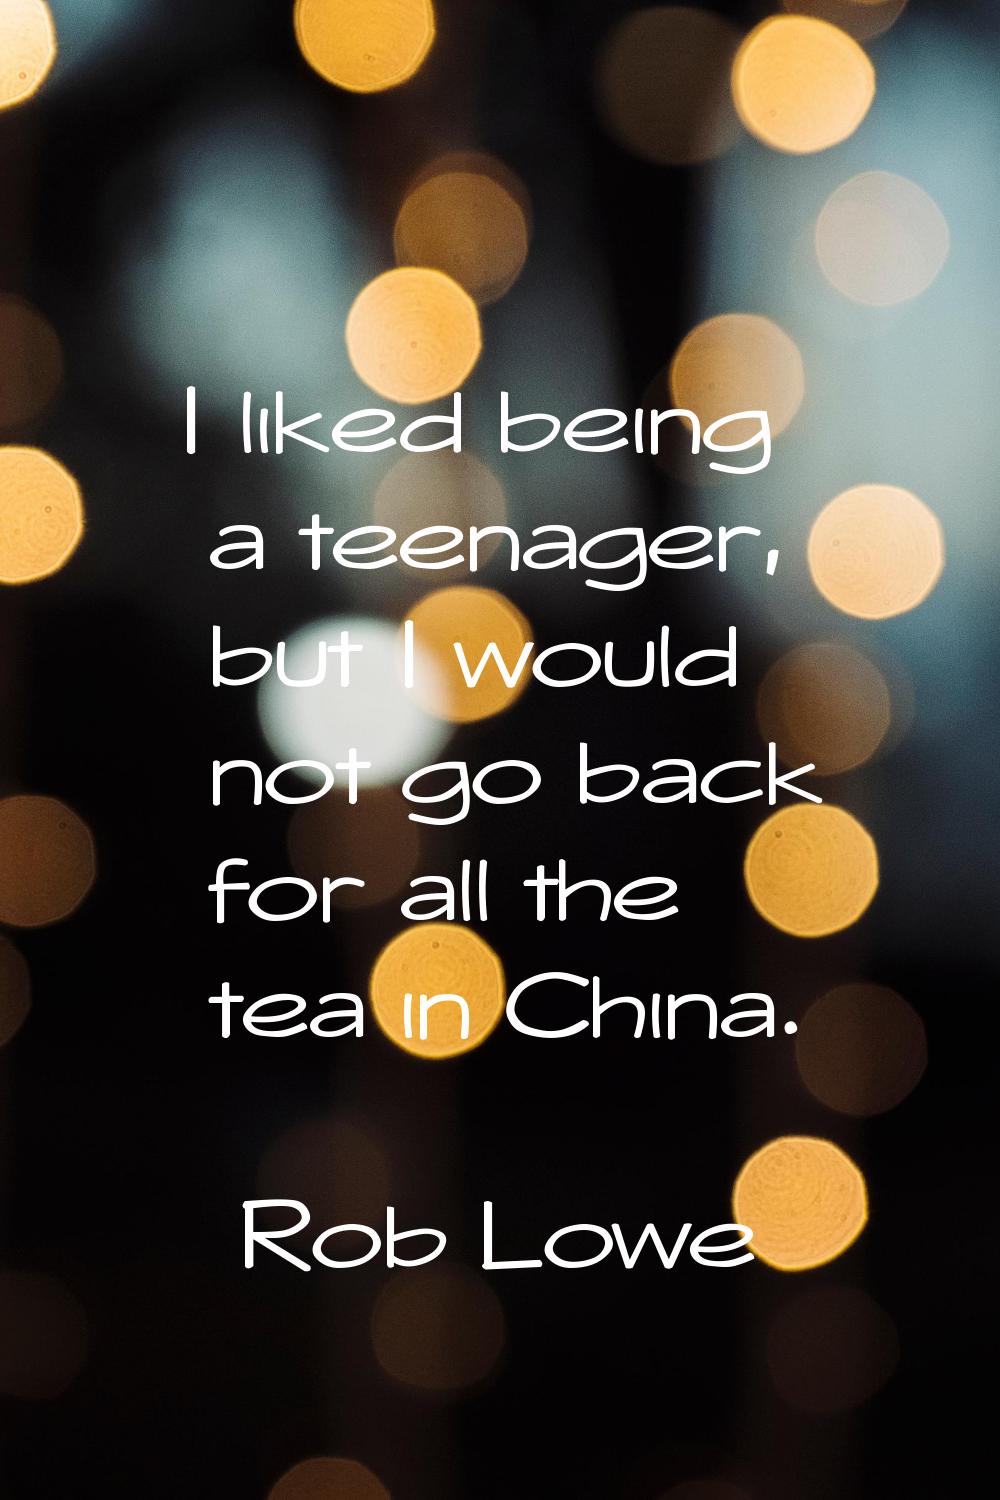 I liked being a teenager, but I would not go back for all the tea in China.